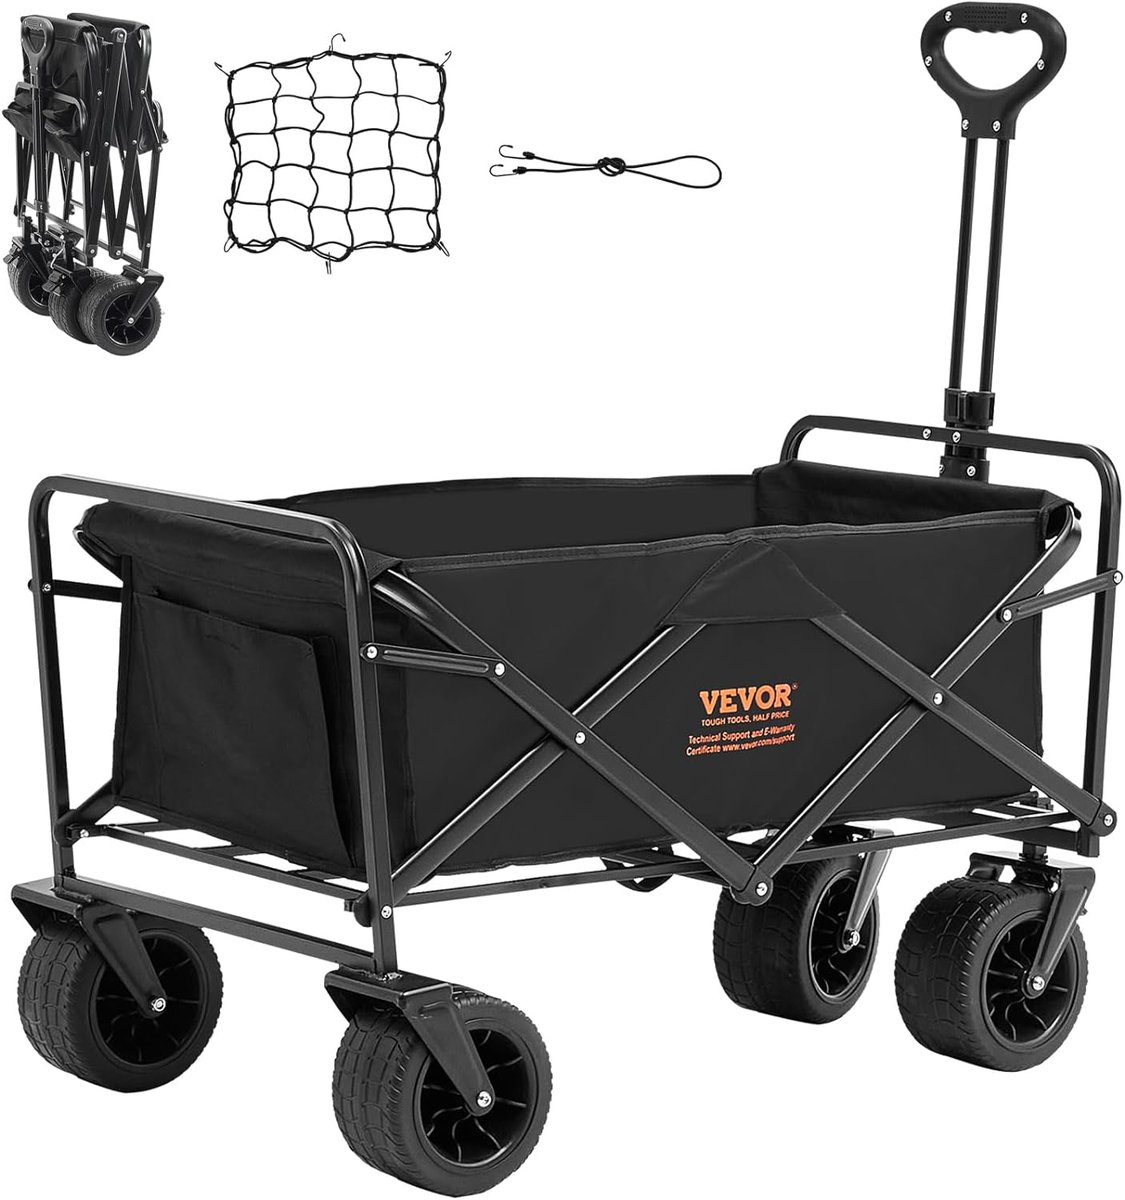 VEVOR 350lbs Collapsible Wagon for $54.99 (was $99.99)

Lowest price ever!

dealsfinder.io/?go=amzn.to/4b…